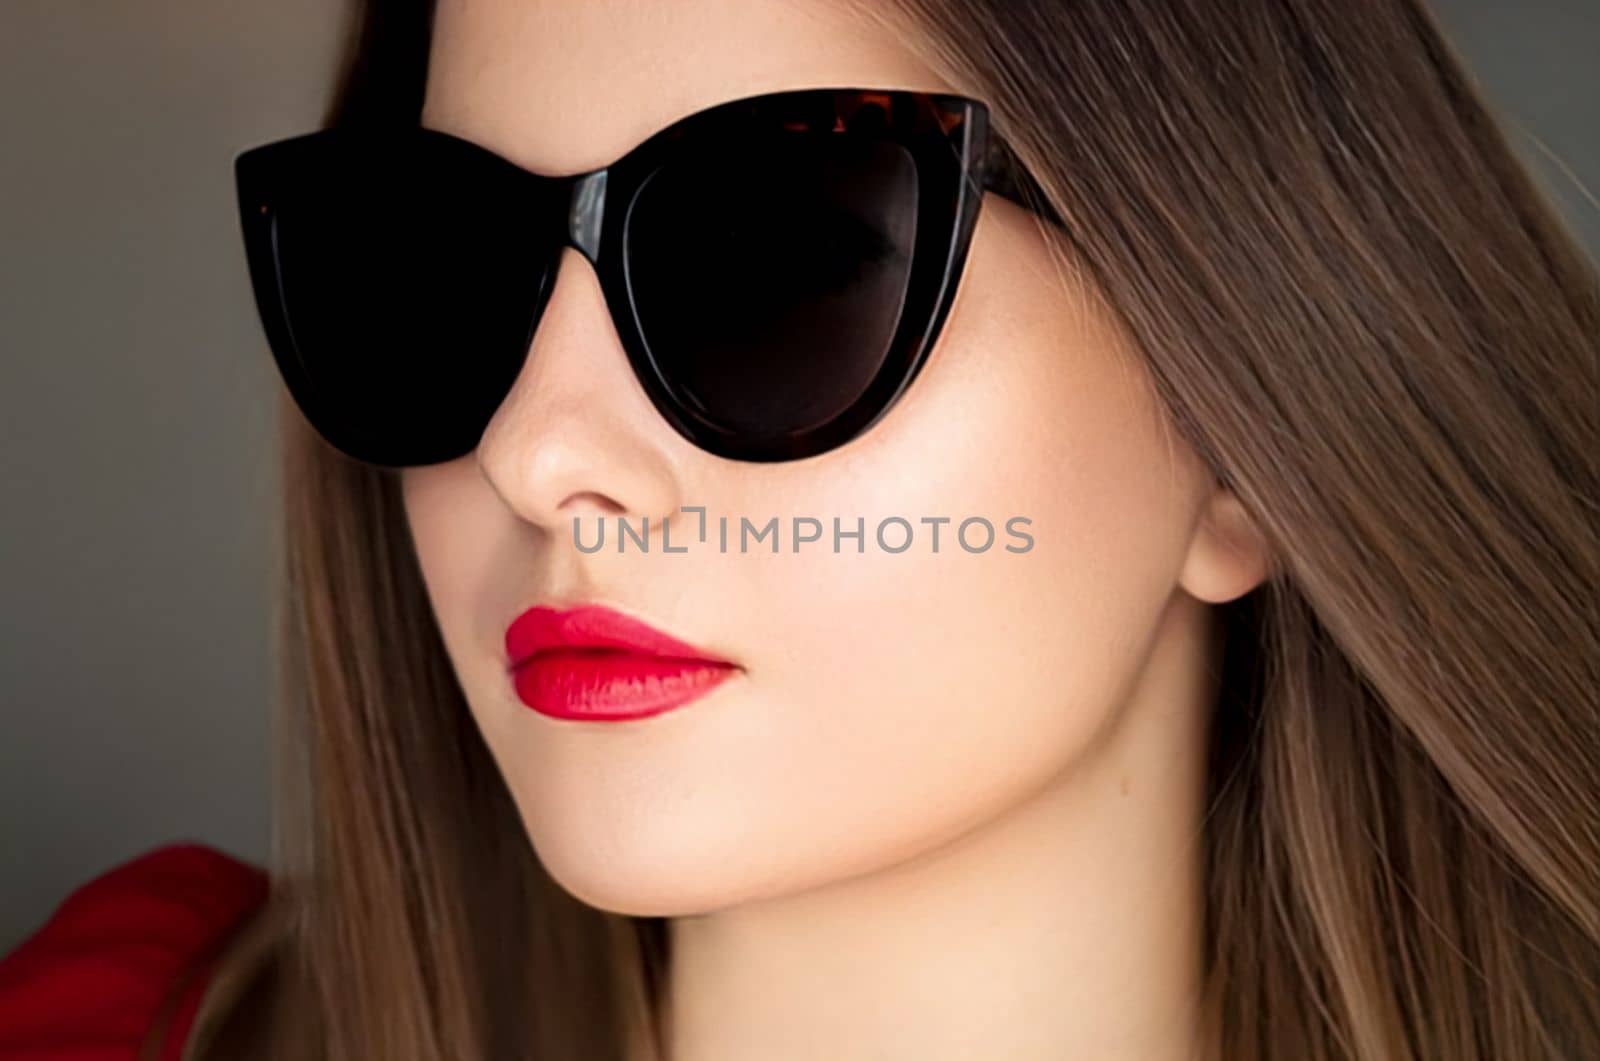 Beauty, fashion and style, face portrait of beautiful woman wearing stylish cat eye sunglasses and red lipstick make-up, luxury accessory and summer lifestyle, glamour and chic look by Anneleven